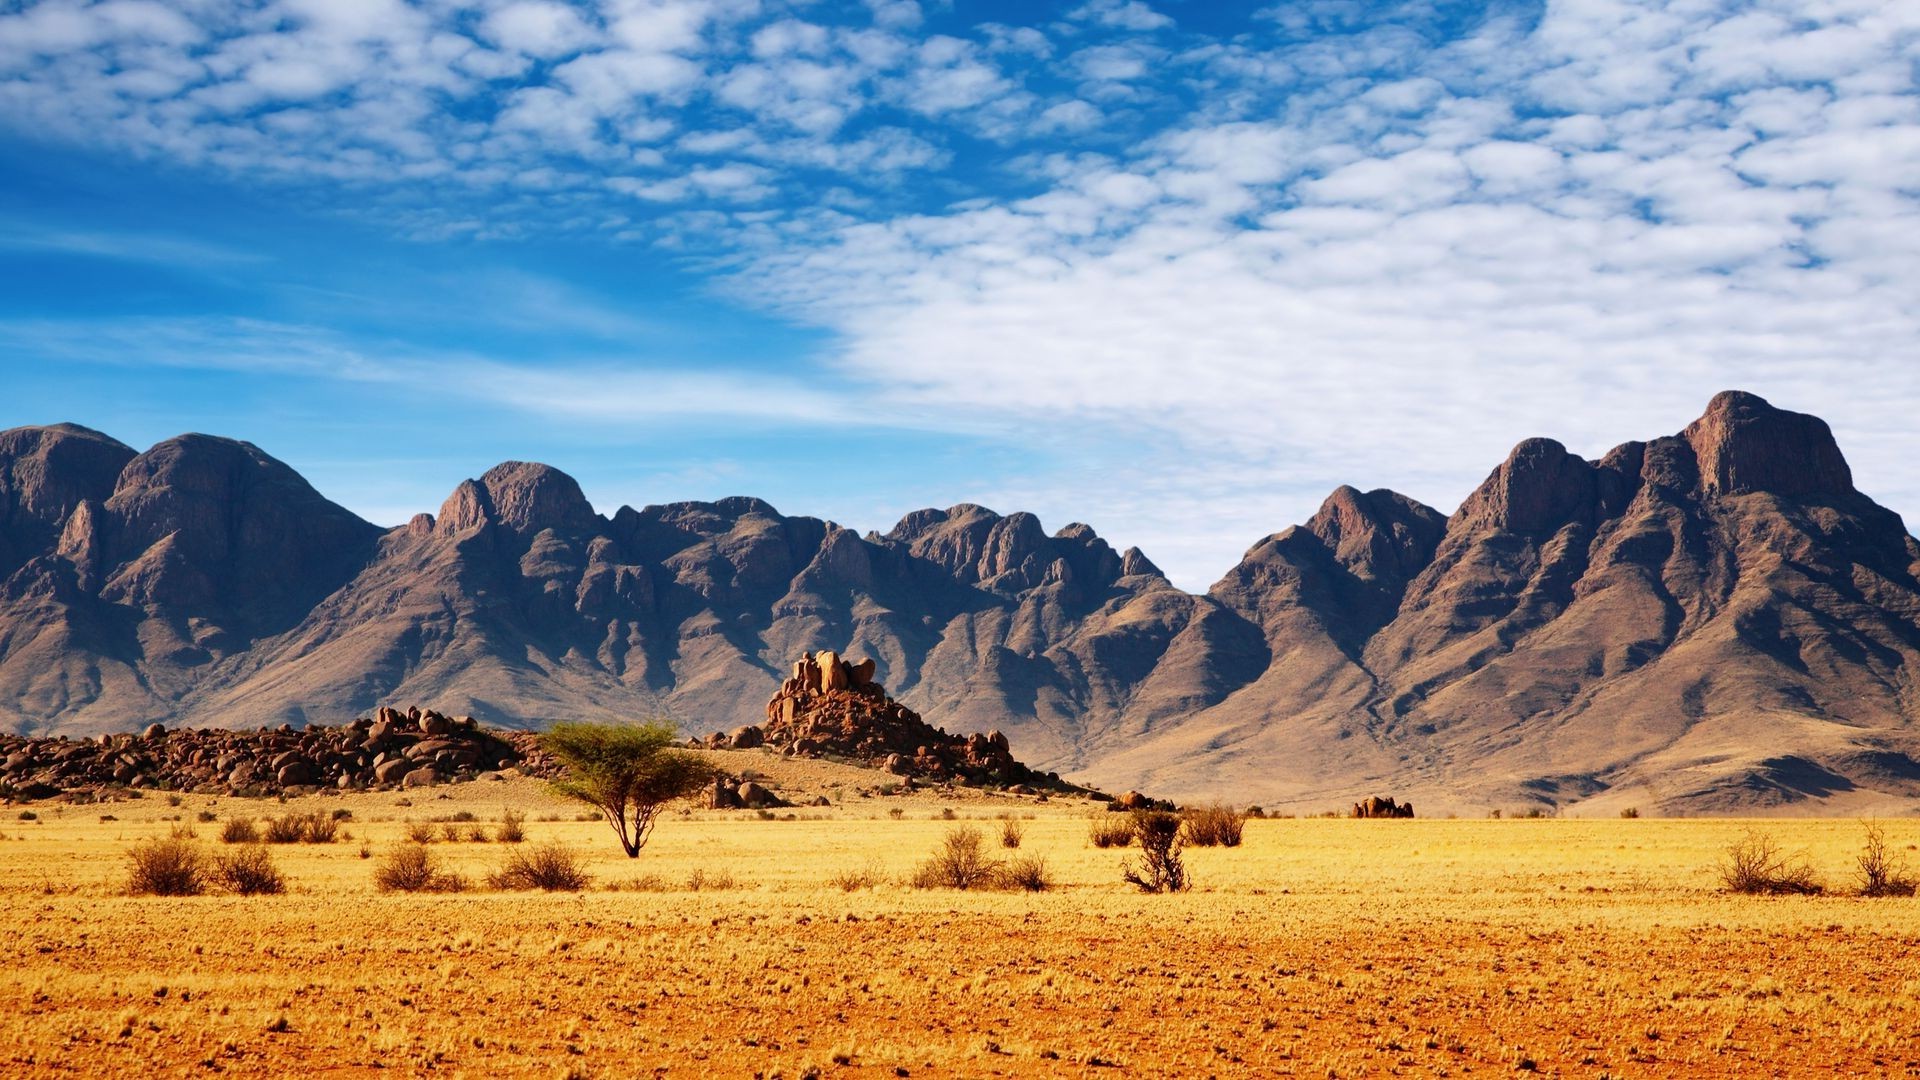 Nature, Landscape, Mountain, Clouds, Namibia, Africa 